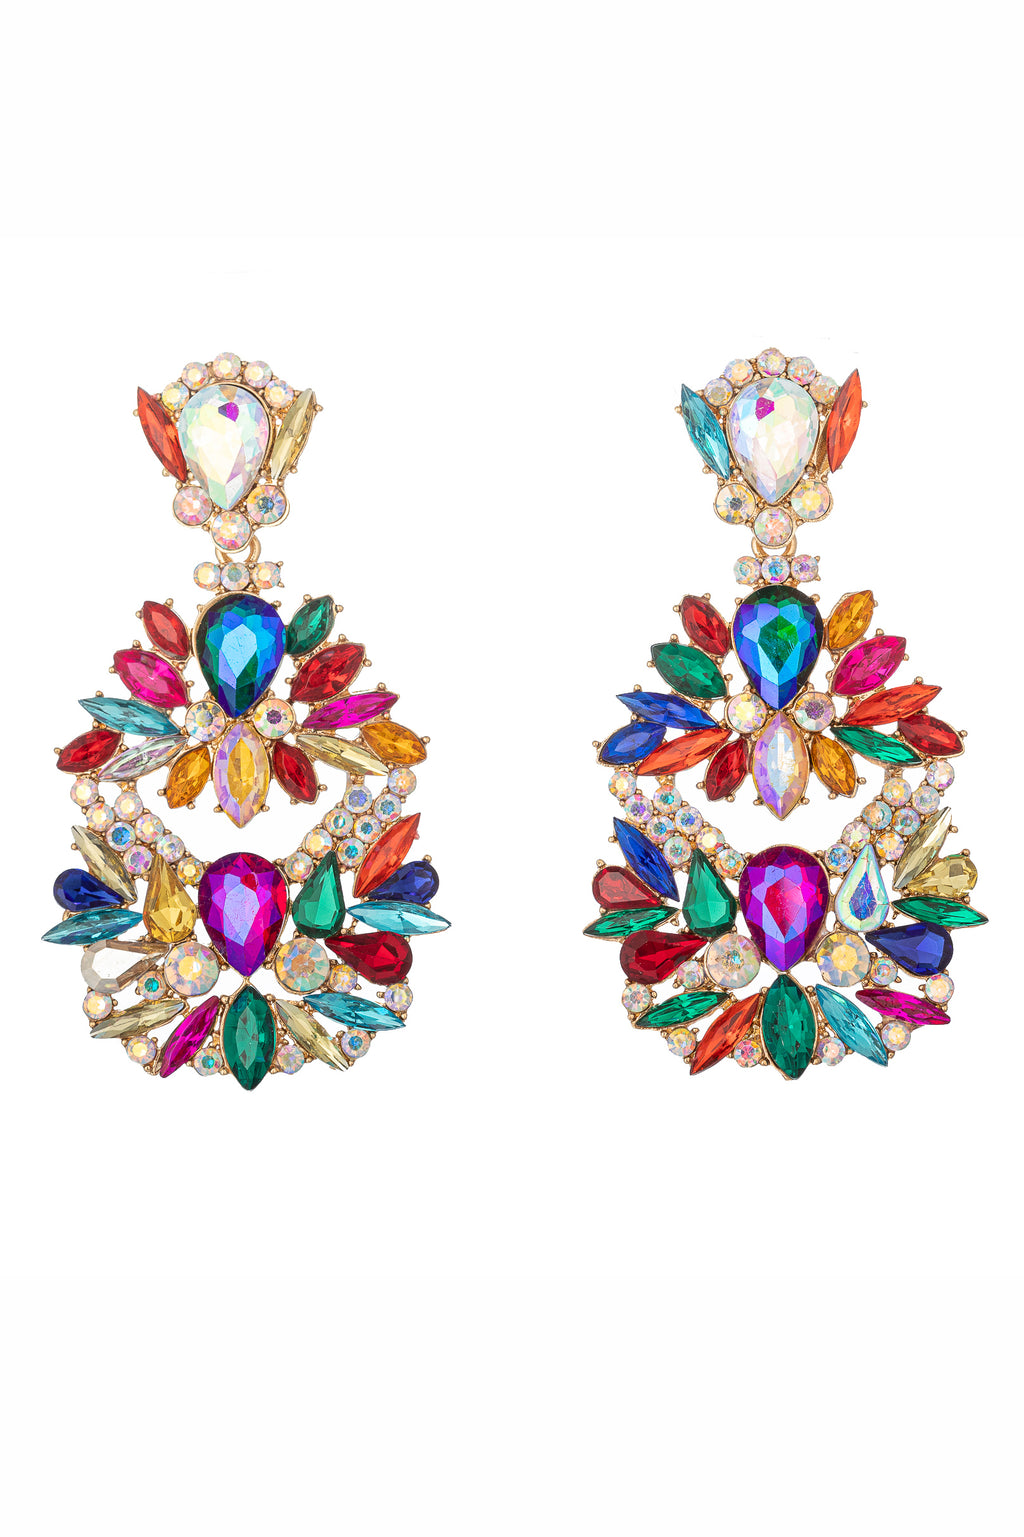 Gold tone alloy dangle statement earrings with rainbow colored glass crystals.